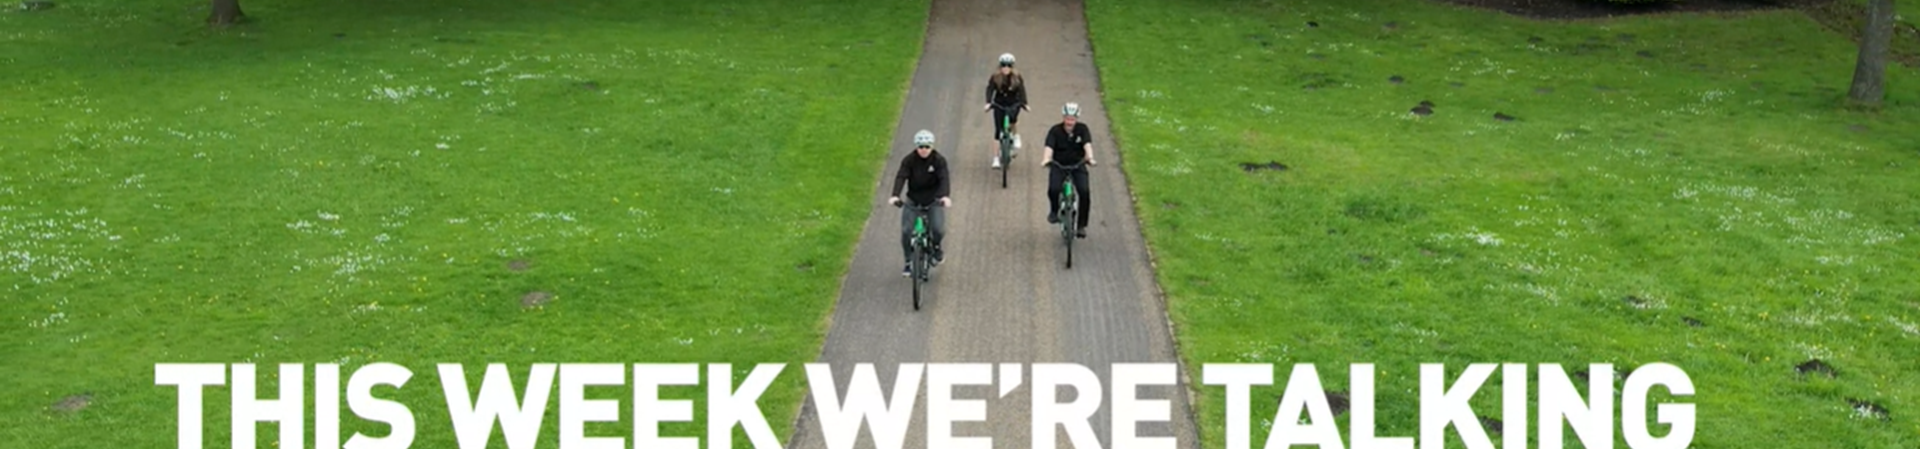 'This week we're talking health and wellbeing' text lay over image of three cyclists cycling on a park path surrounded by a field 